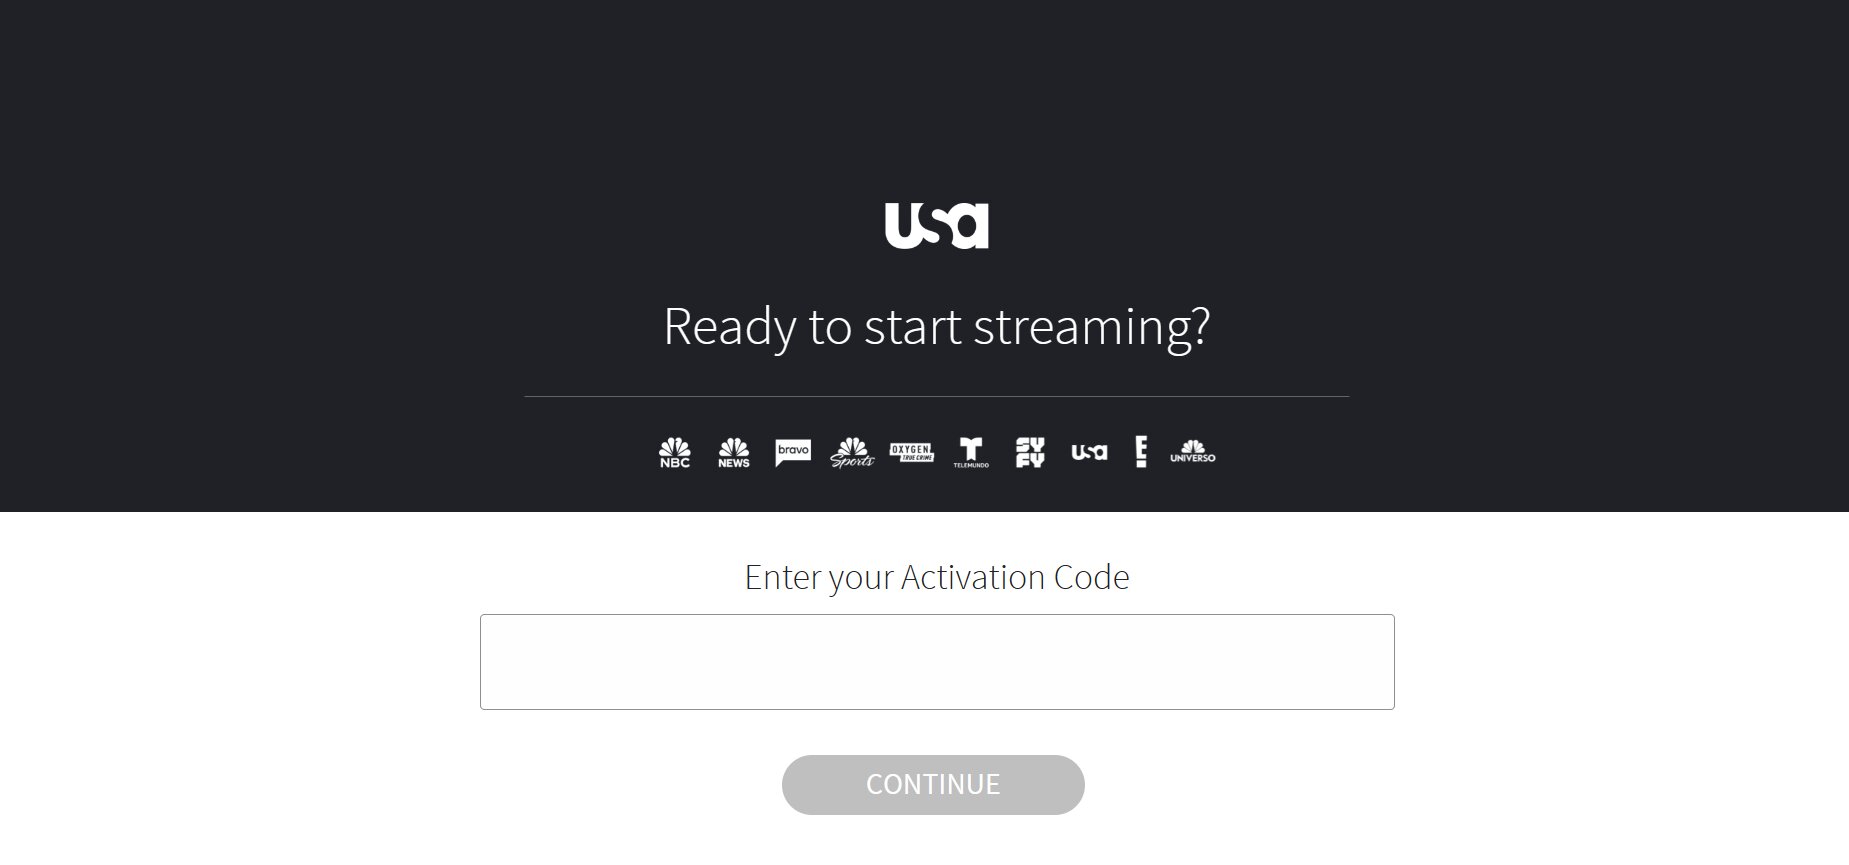 How To Activate Usa Network (Step By Step Guide)